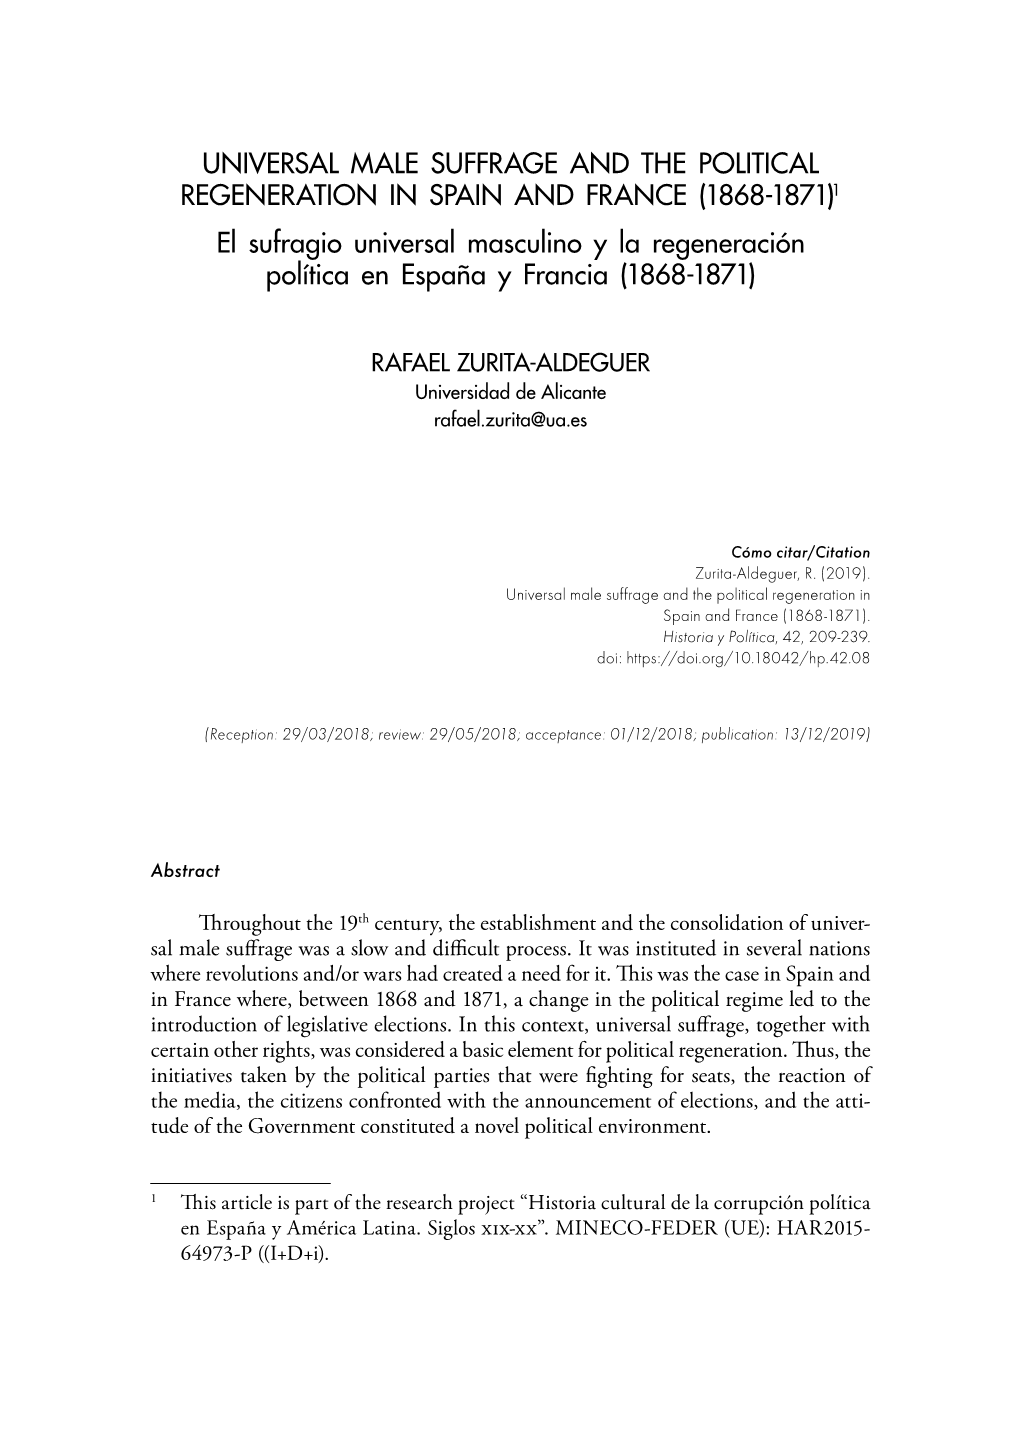 UNIVERSAL MALE SUFFRAGE and the POLITICAL REGENERATION in SPAIN and FRANCE (1868-1871)1 El Sufragio Universal Masculino Y La